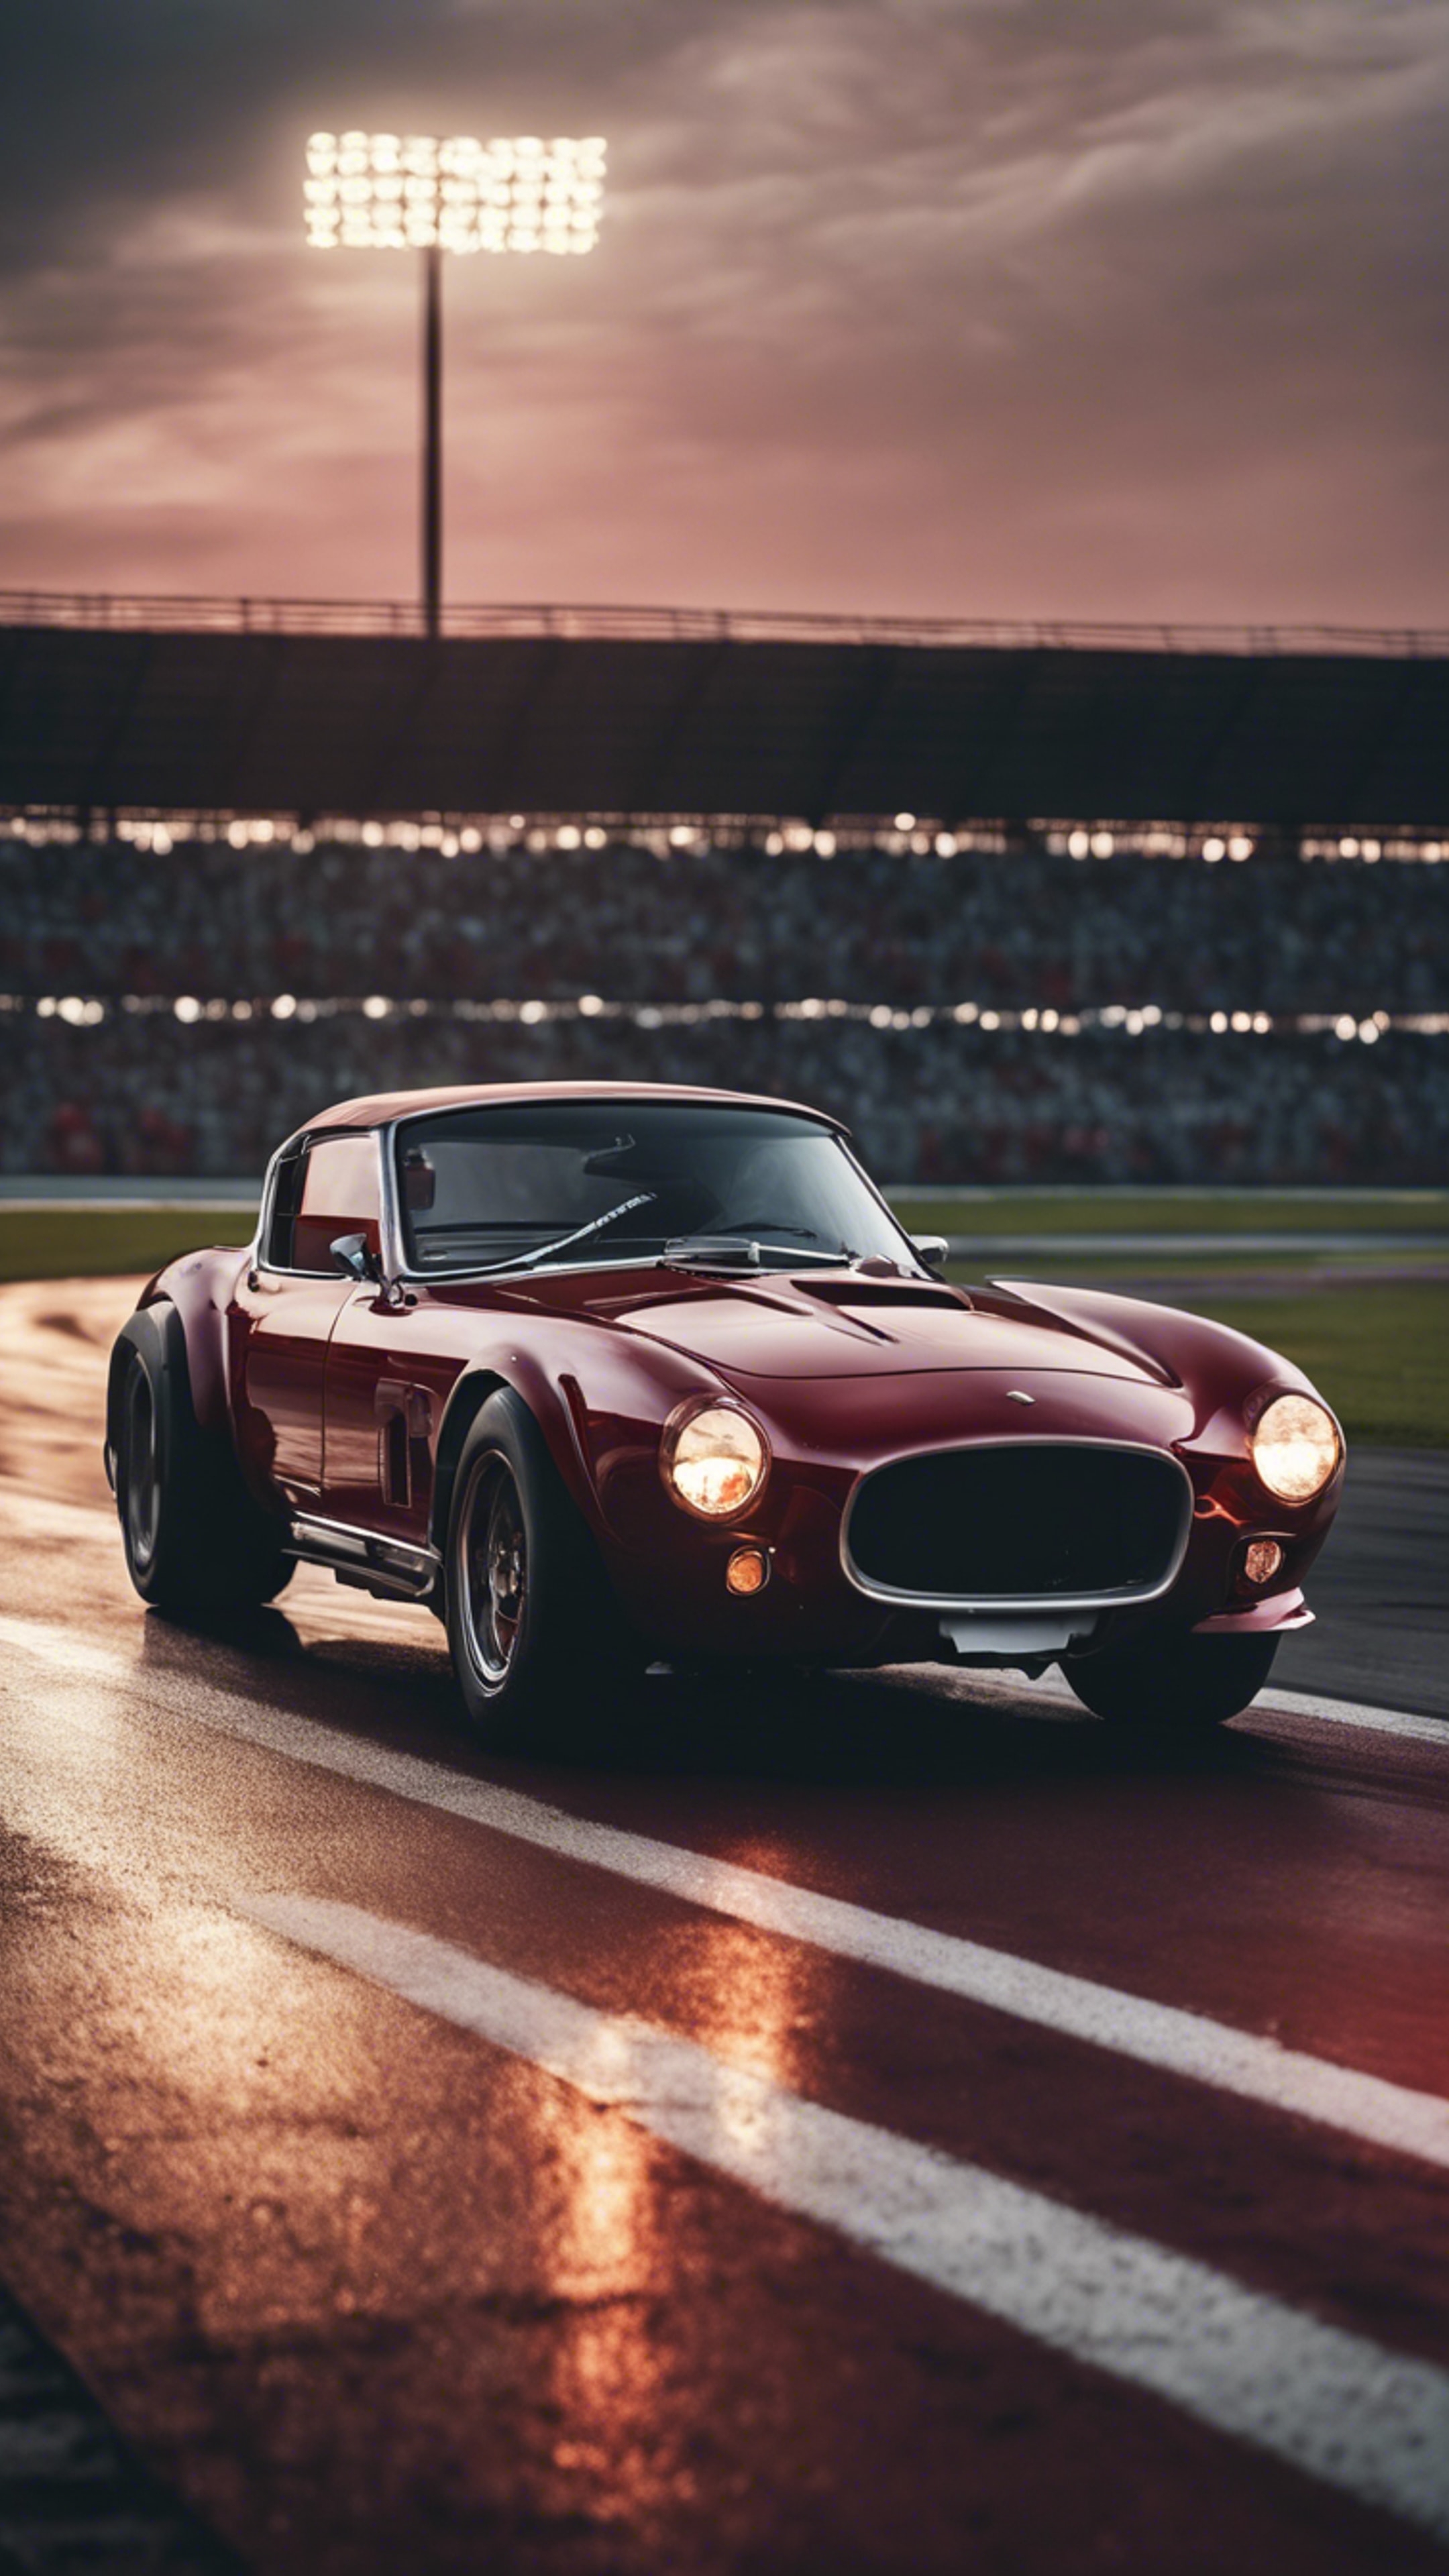 A richly toned dark red sports car racing on a track under the evening sky. Hình nền[f7c86e5103c94fca80ae]